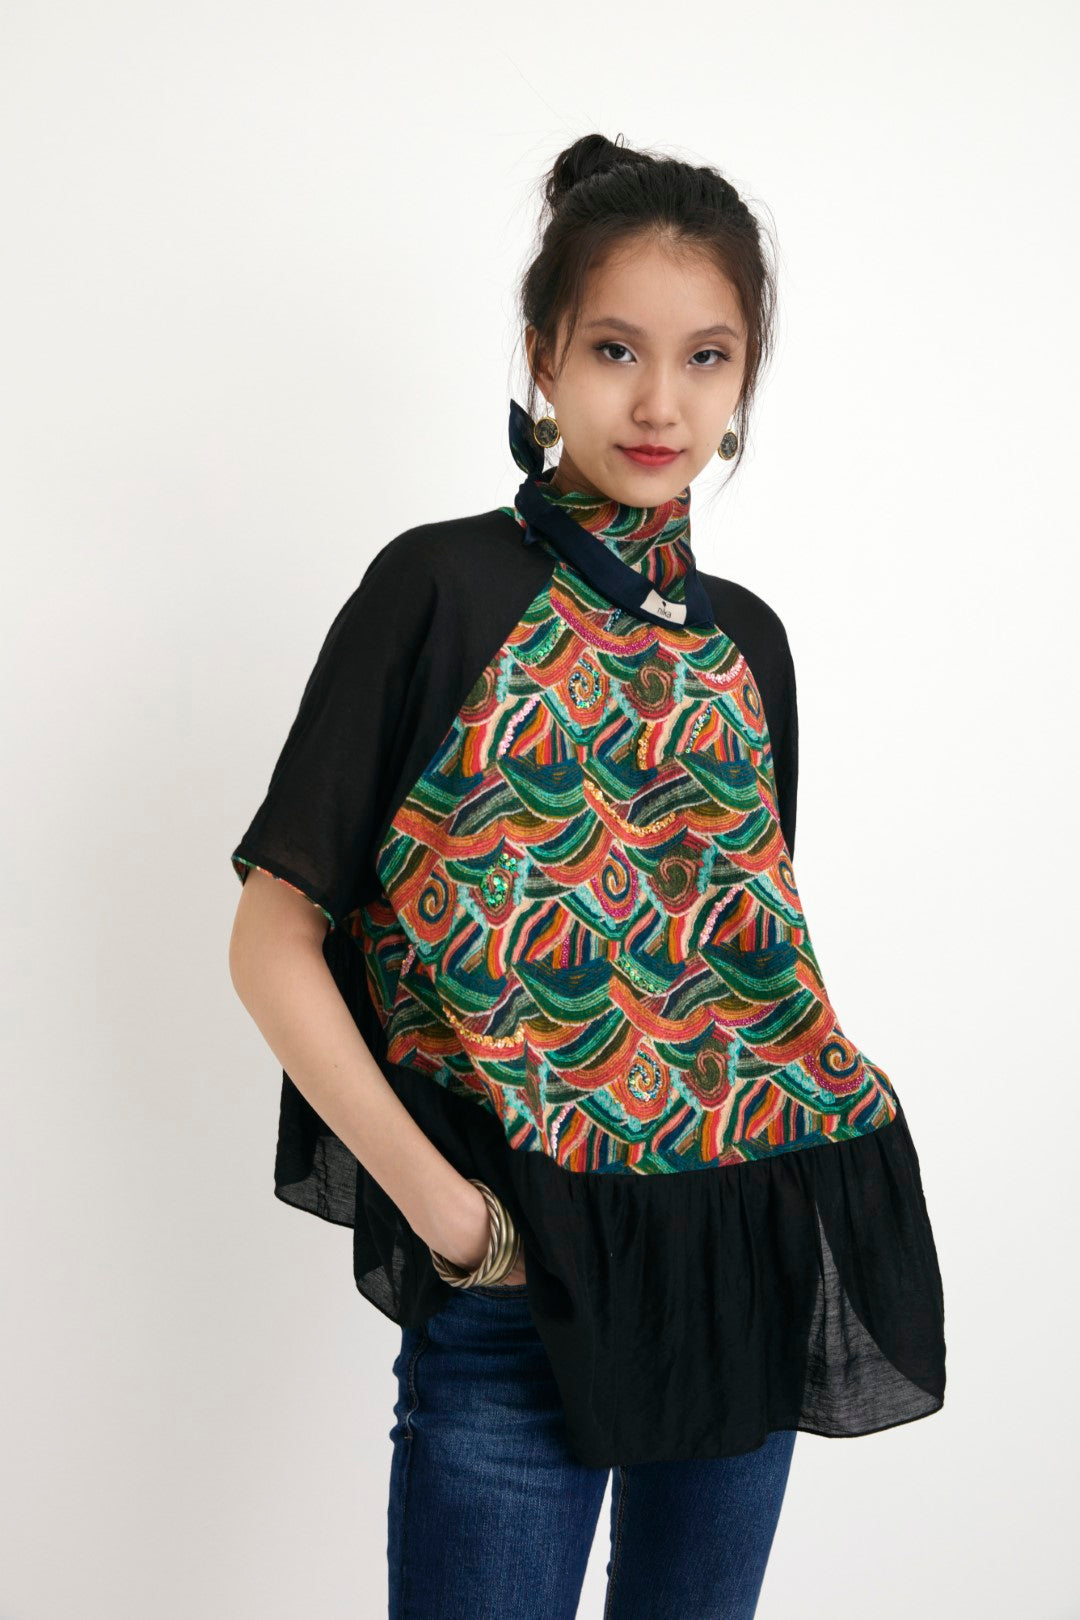 "Handpainted iconic ocean wave print body with solid black color sleeve & frill top embellished with hand embroidery in multi-colors sequins and beads. 100% Handwoven silk; Lining: 100% cotton 100% cotton Azo free"